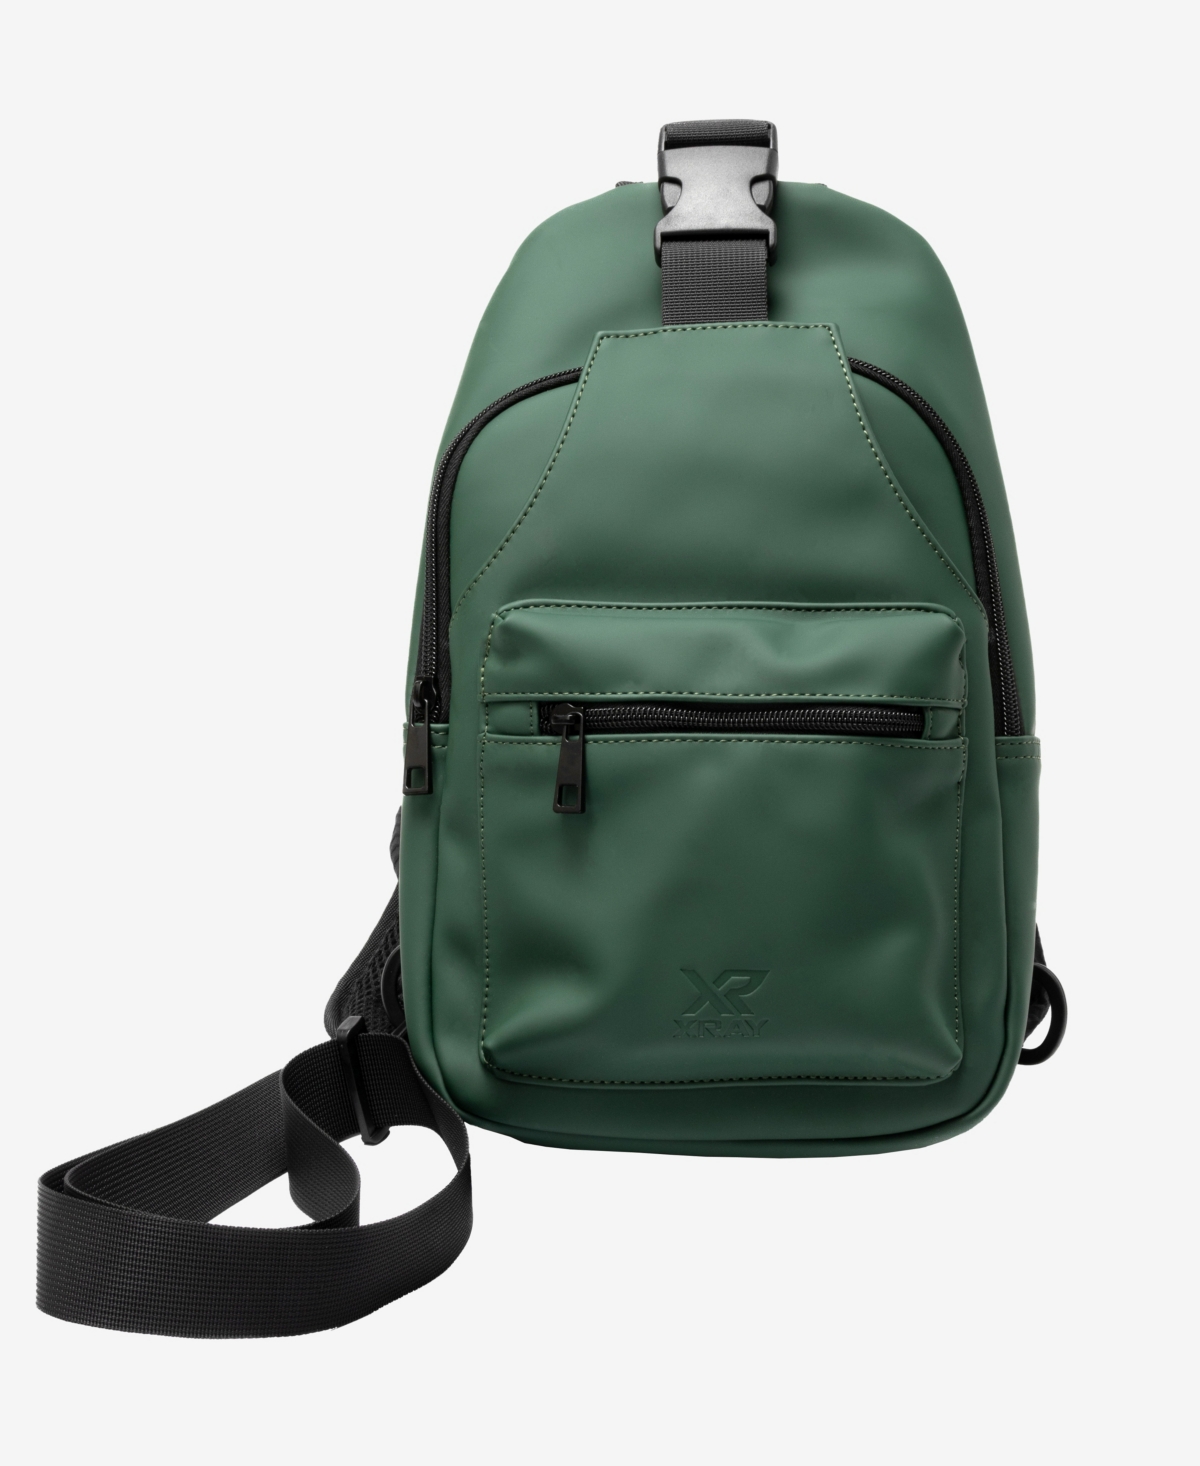 X-ray Pu Sling Backpack In Olive